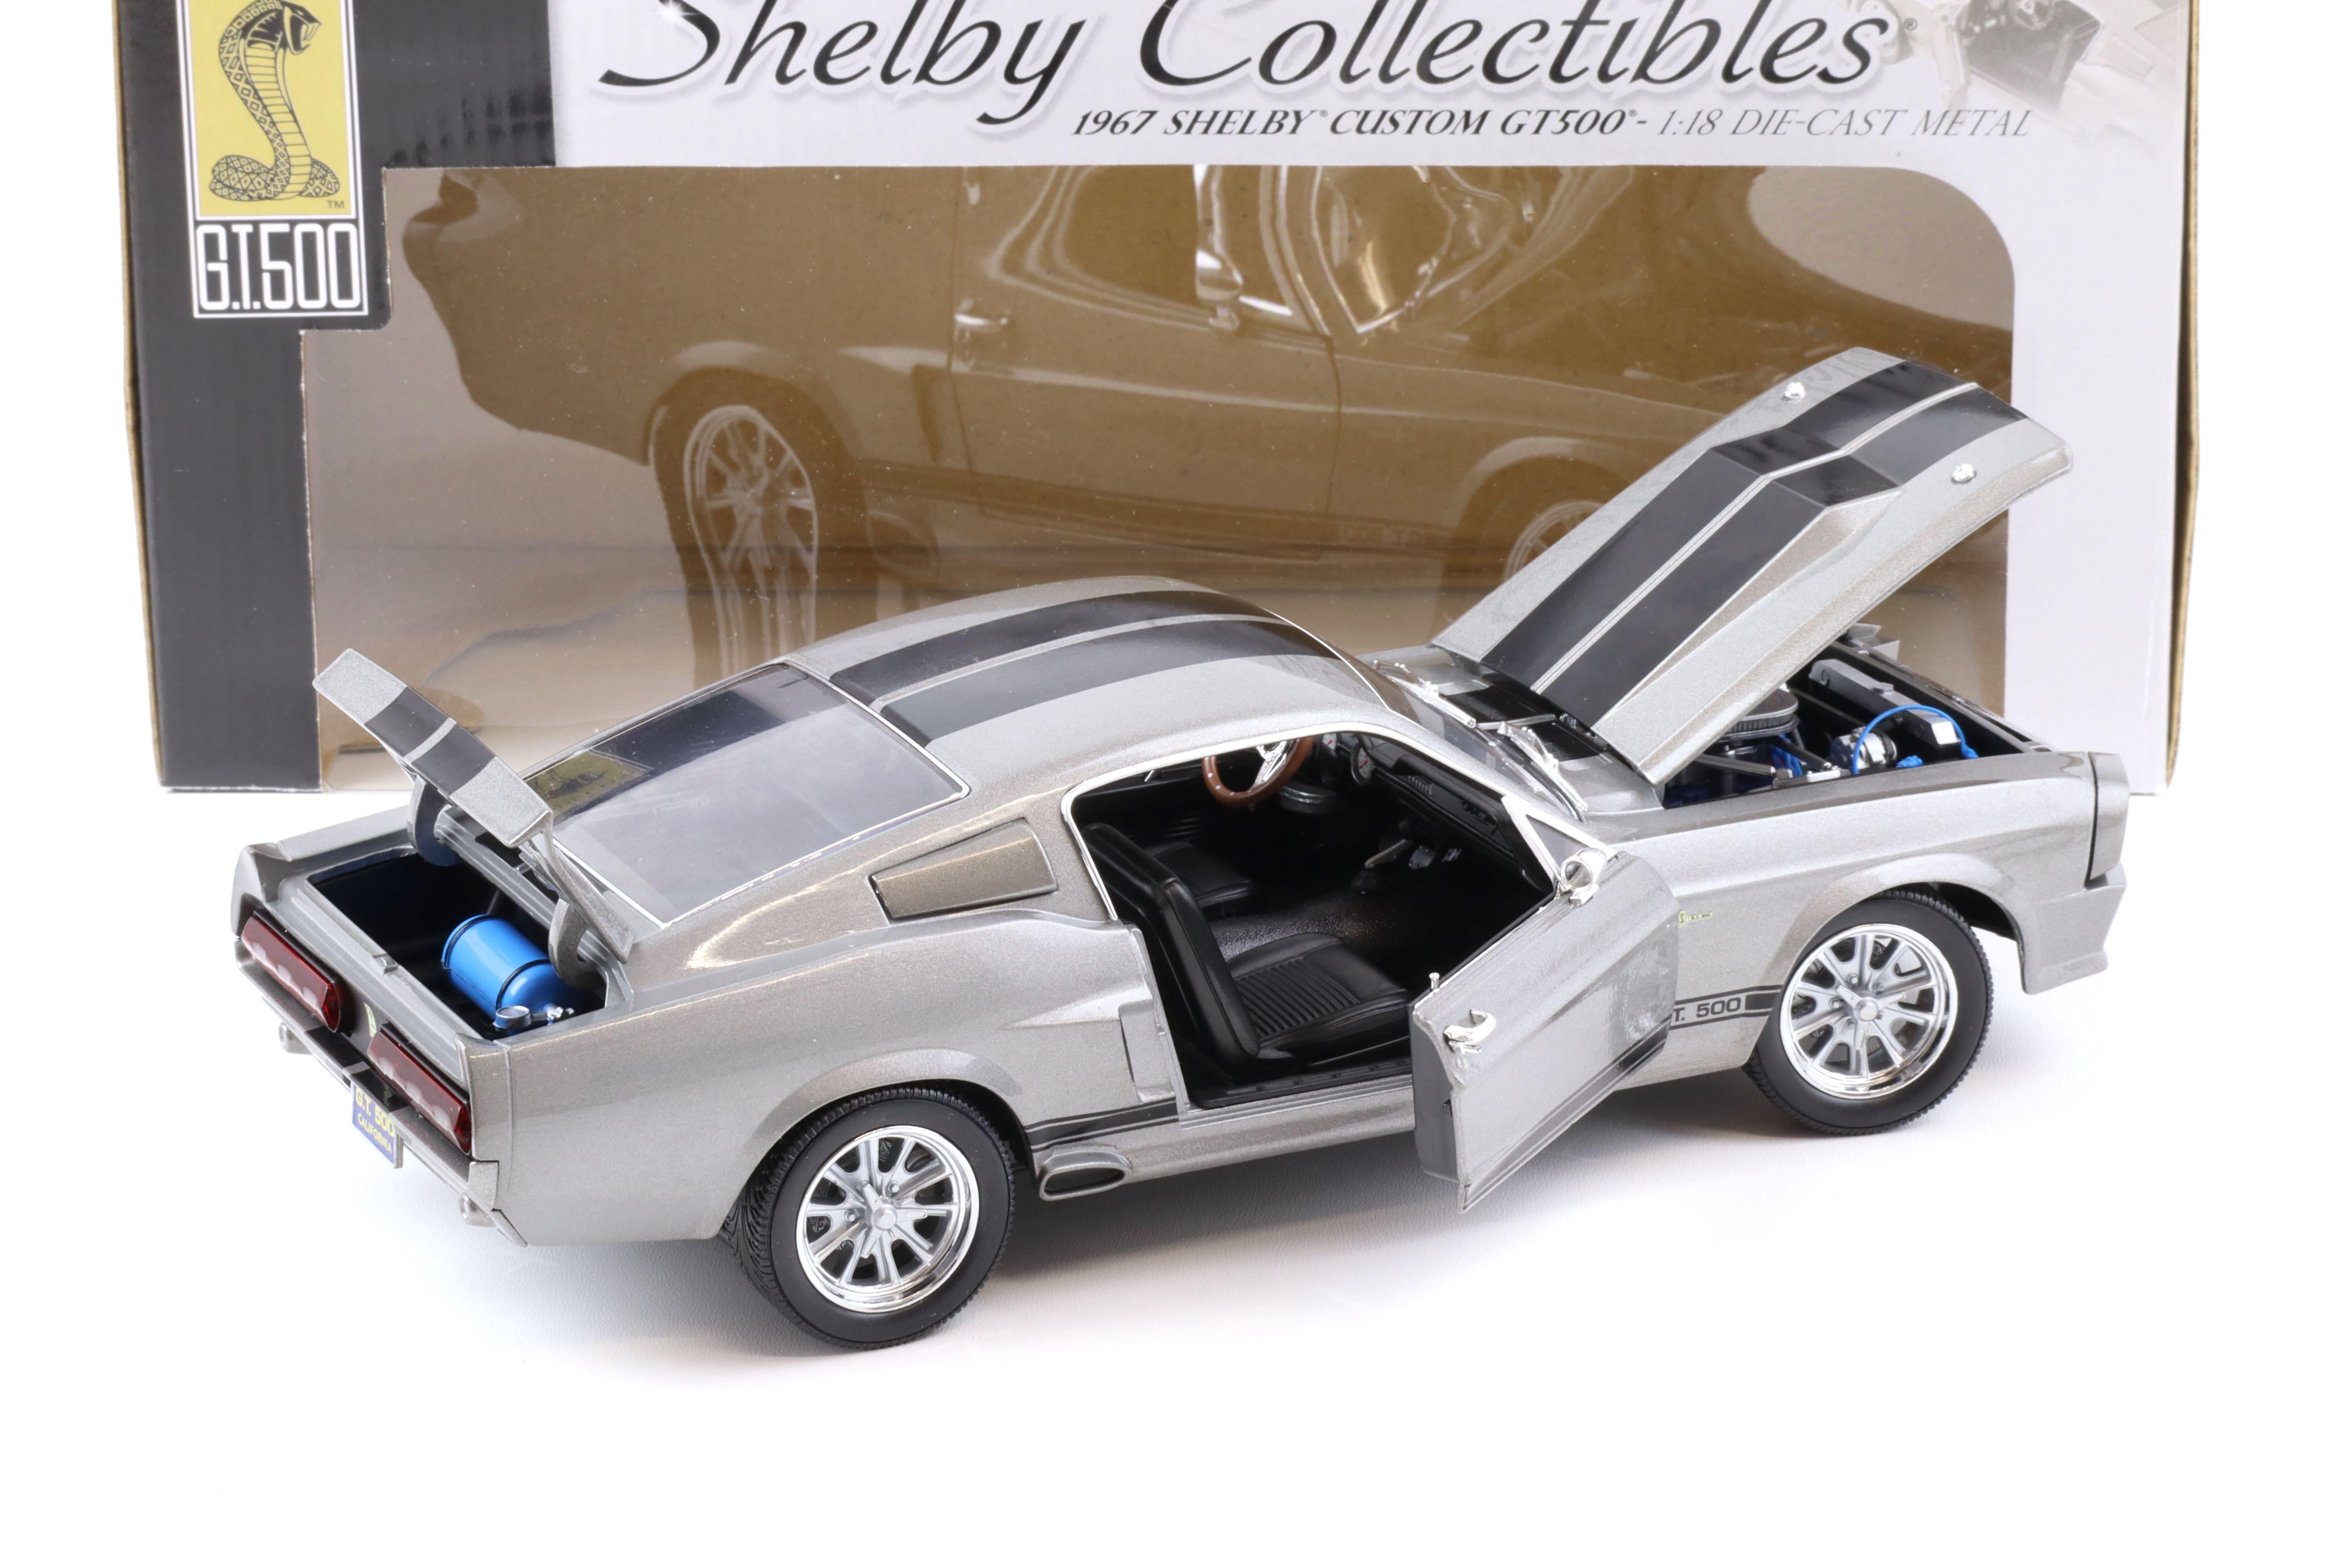 1:18 Shelby Collectibles 1967 Shelby Custom GT 500 grey/black  like ELEANOR